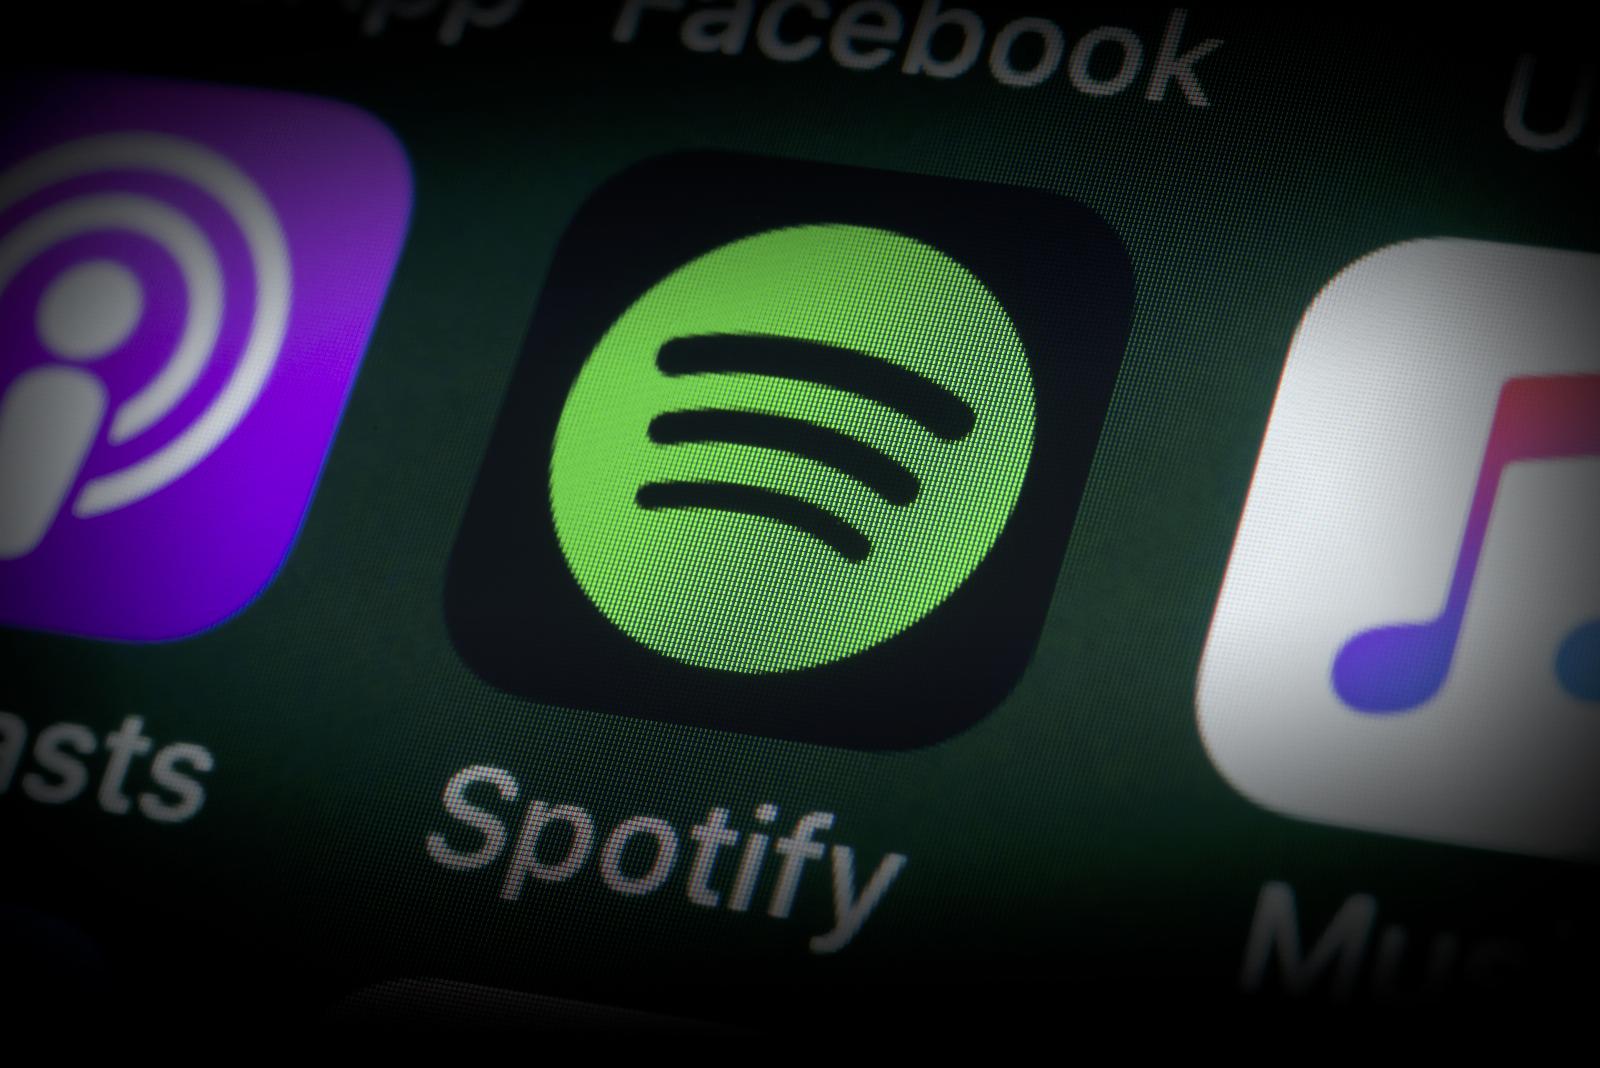 Spotify introduces new podcaster tools, including customized pages, analytics and other controls